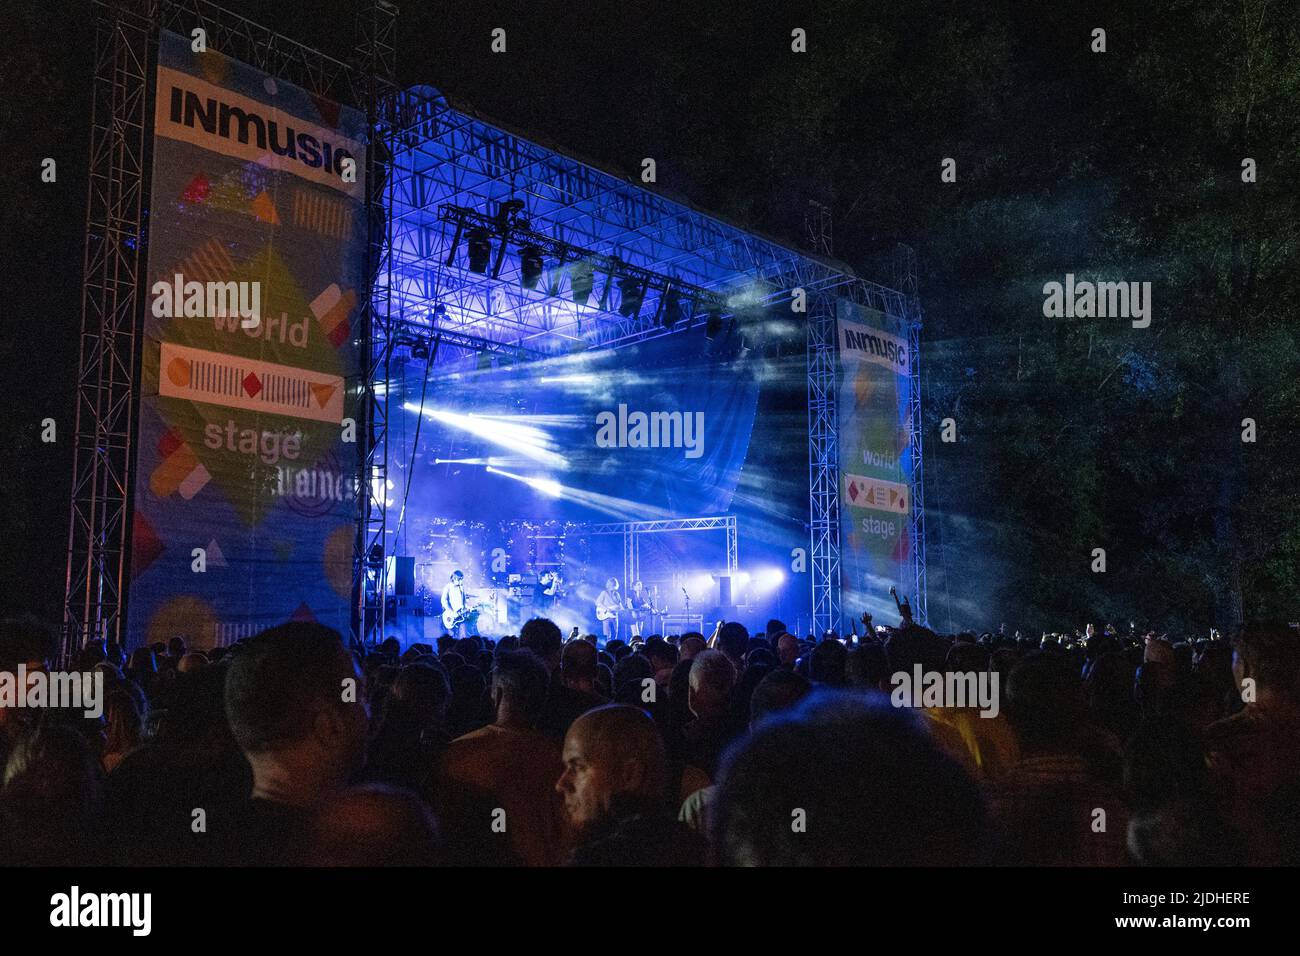 Fontaines D.C. performed at the InMusic Festival in Zagreb, Croatia on June 20, 2022. INmusic festival is the largest open-air festival in Croatia. Beginning in 2006, it is held every year at the end of June at Jarun. Photo: Zoe Sarlija/PIXSELL Stock Photo